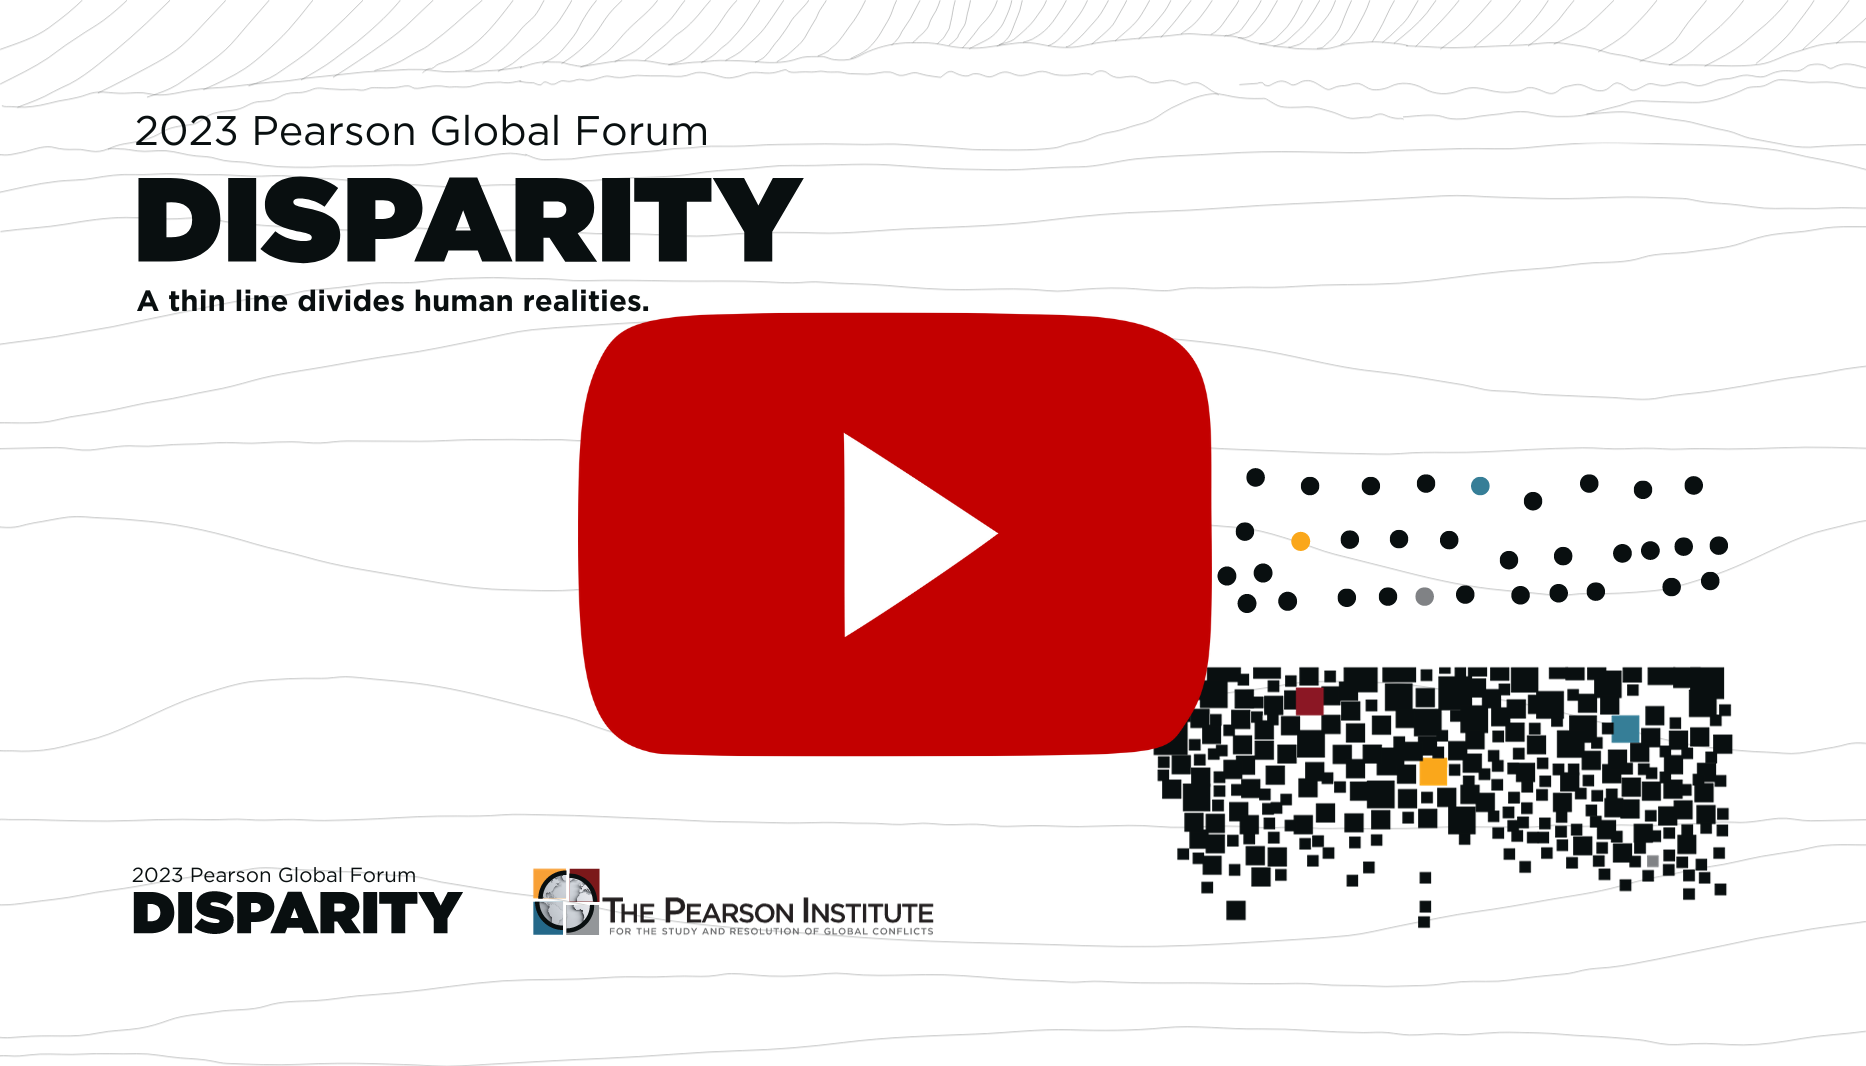 YouTube video link to 2023 Pearson Global Forum